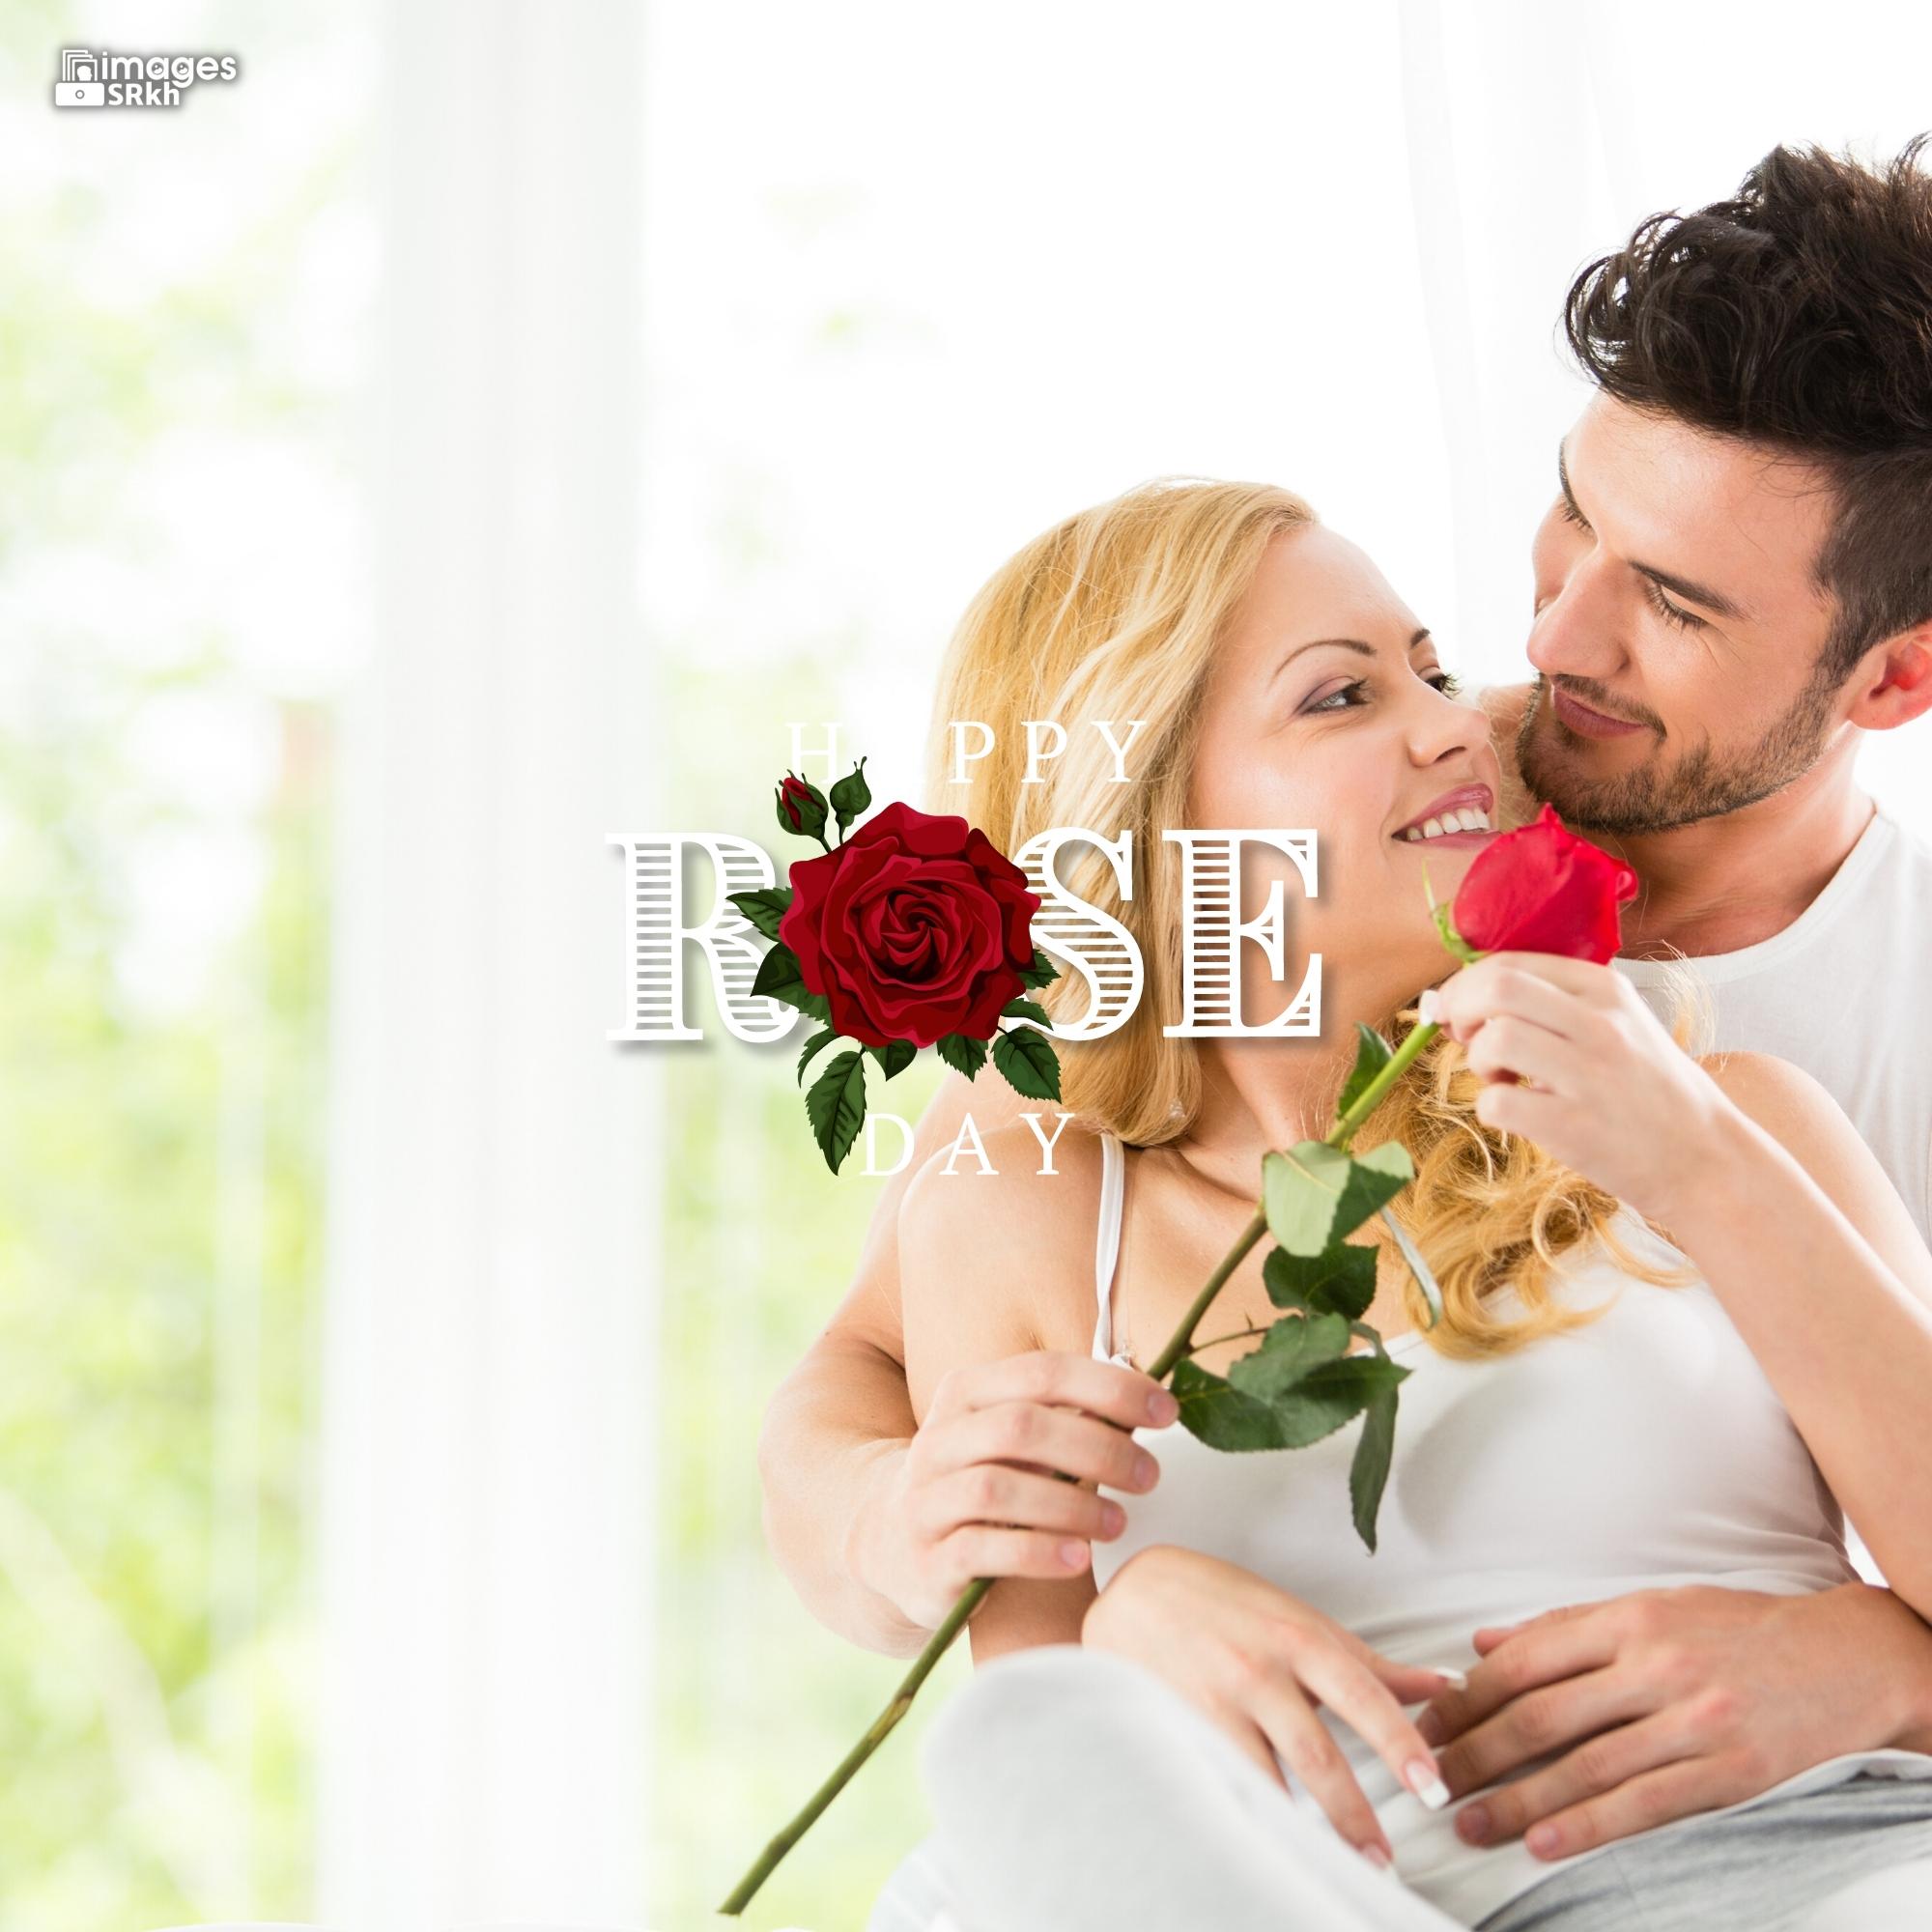 Romantic Rose Day Images Hd Download (36)